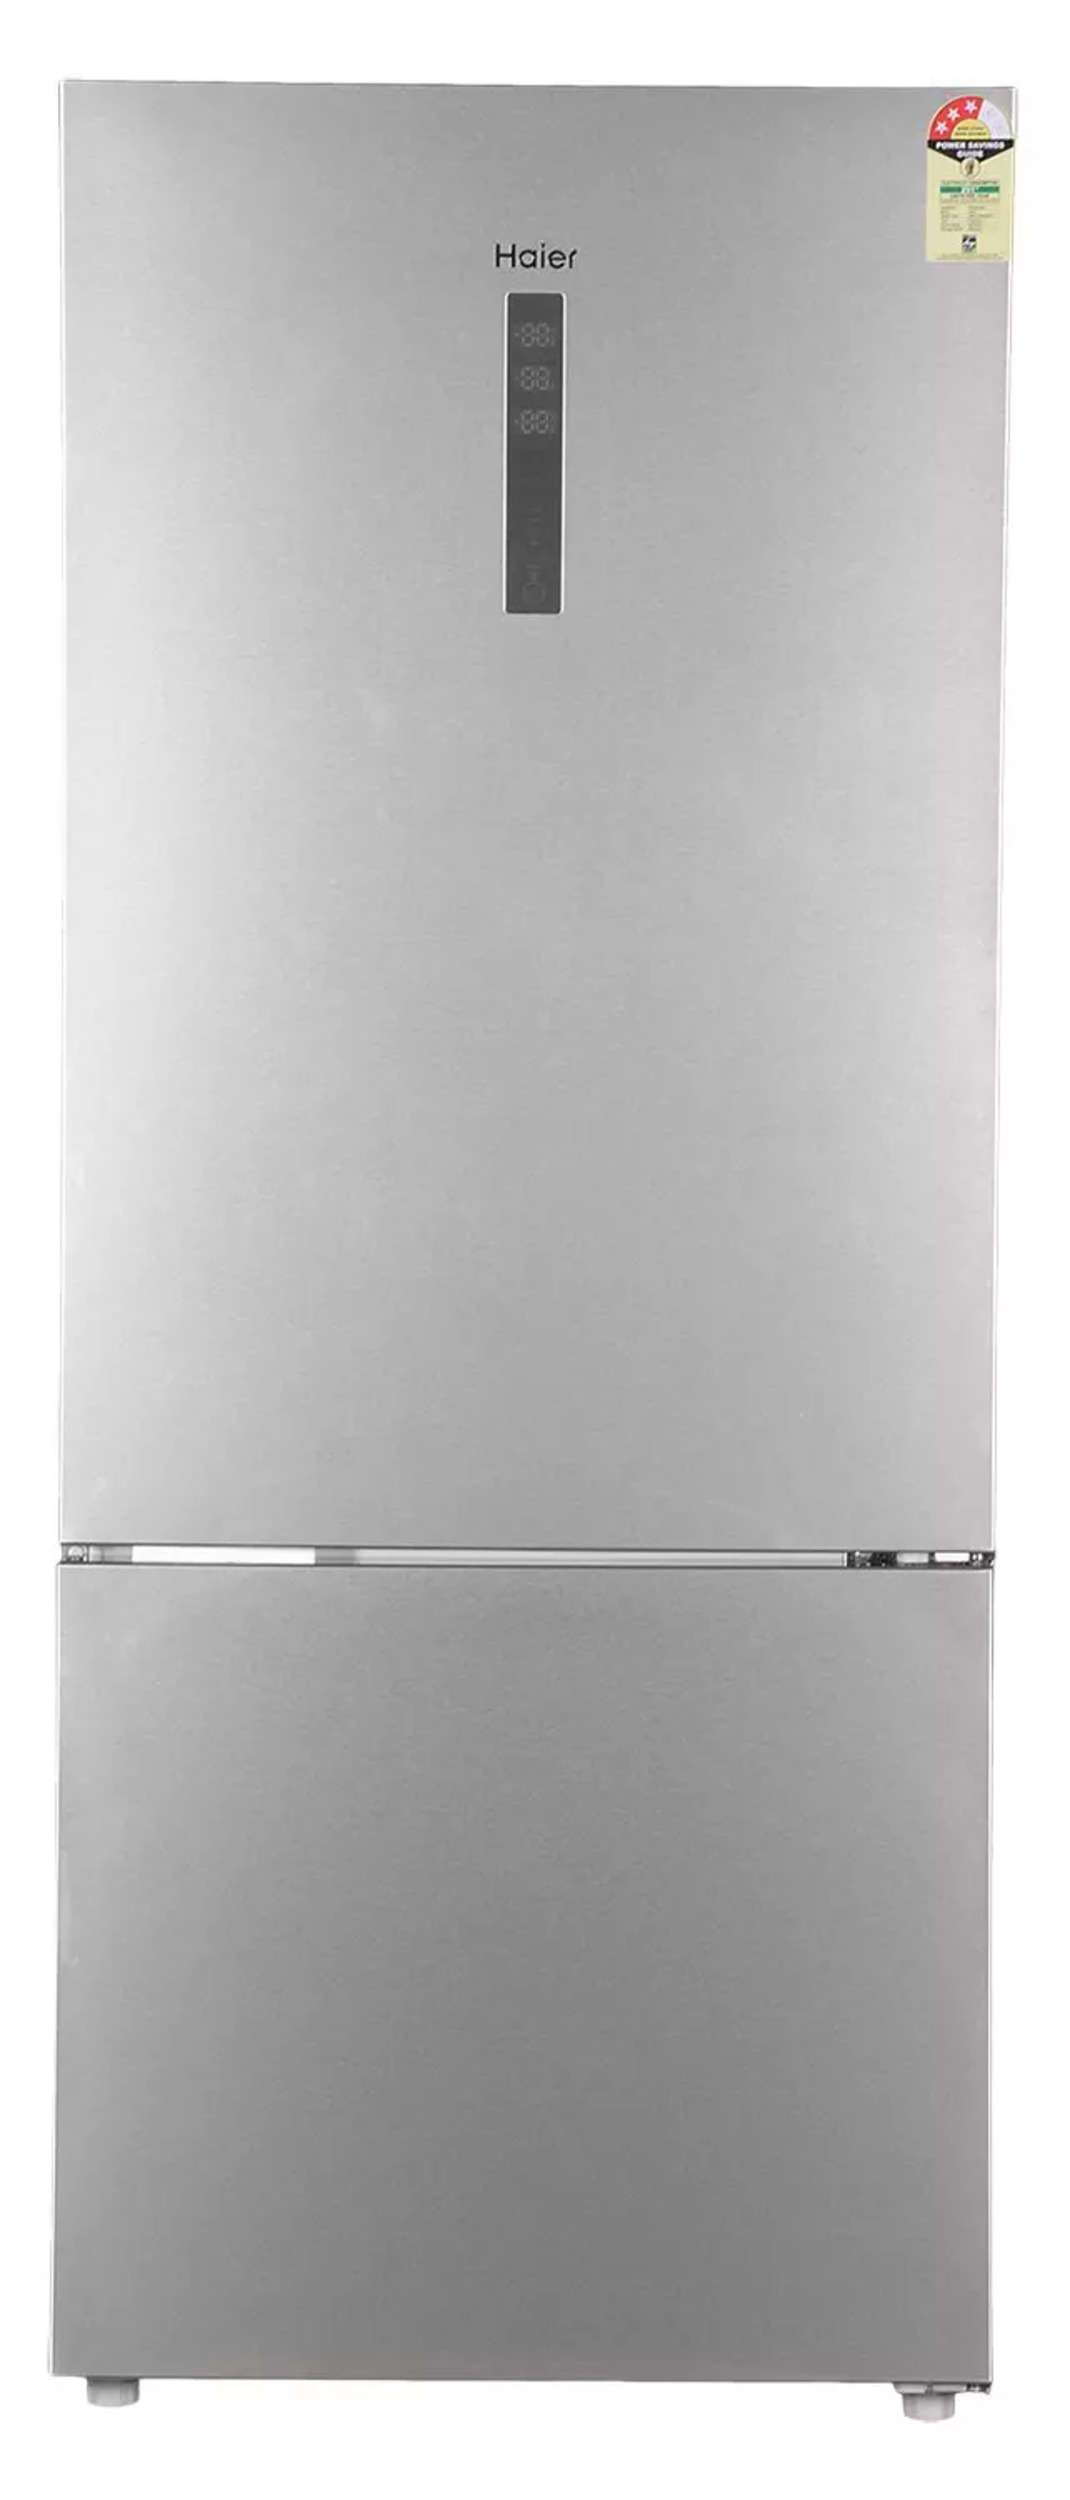 Compare Haier 500 L 3 Star Frost-Free Double Door Refrigerator (HRB 475SS, Stainless Steel) vs 